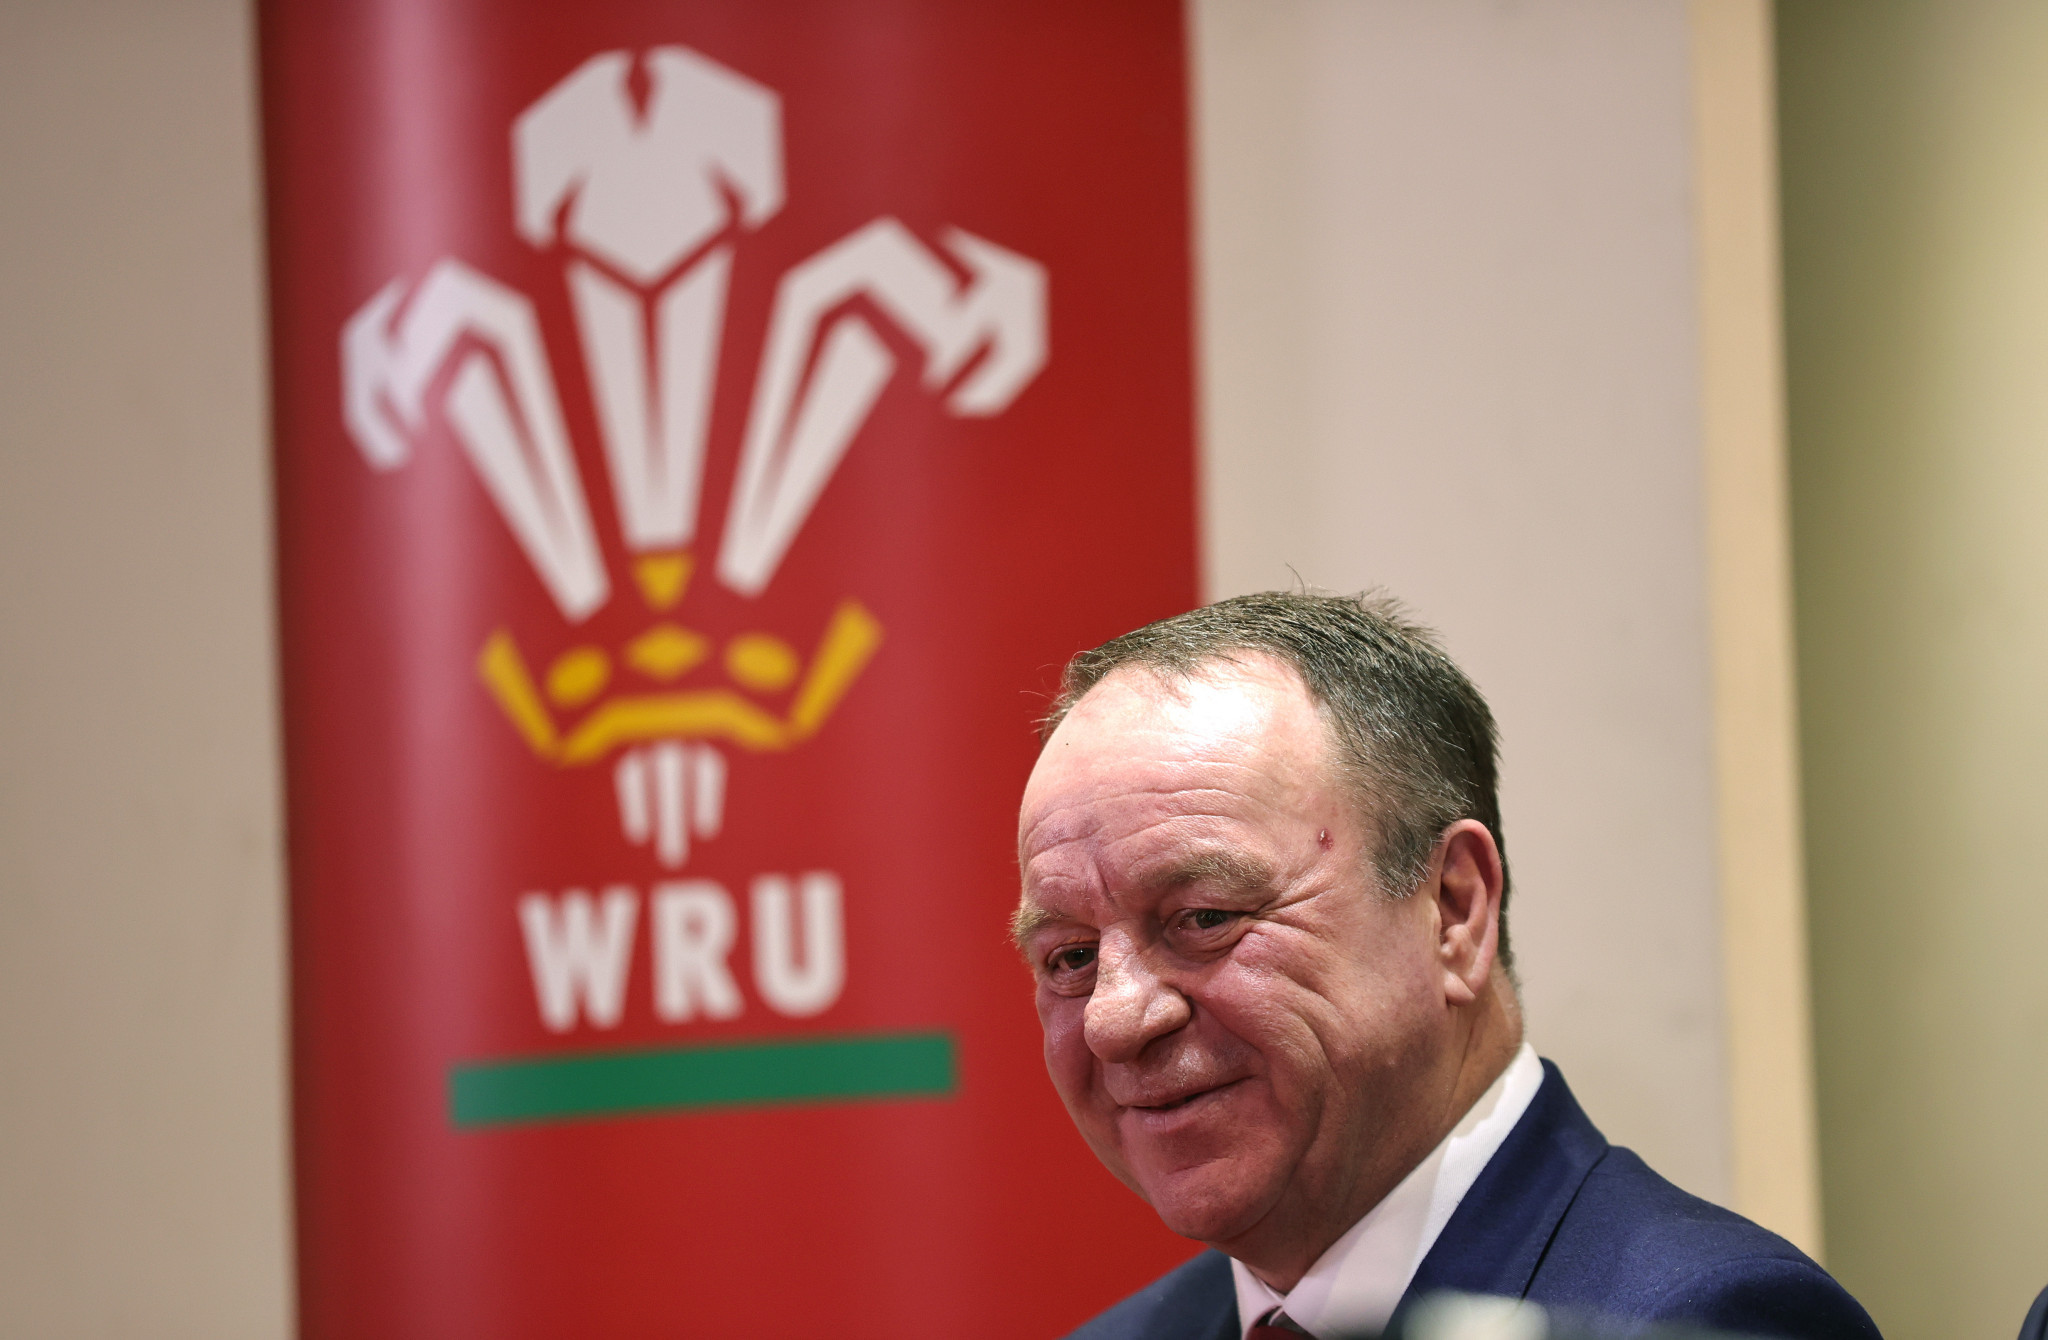 WRU chief executive Steve Phillips has stepped down ©Getty Images